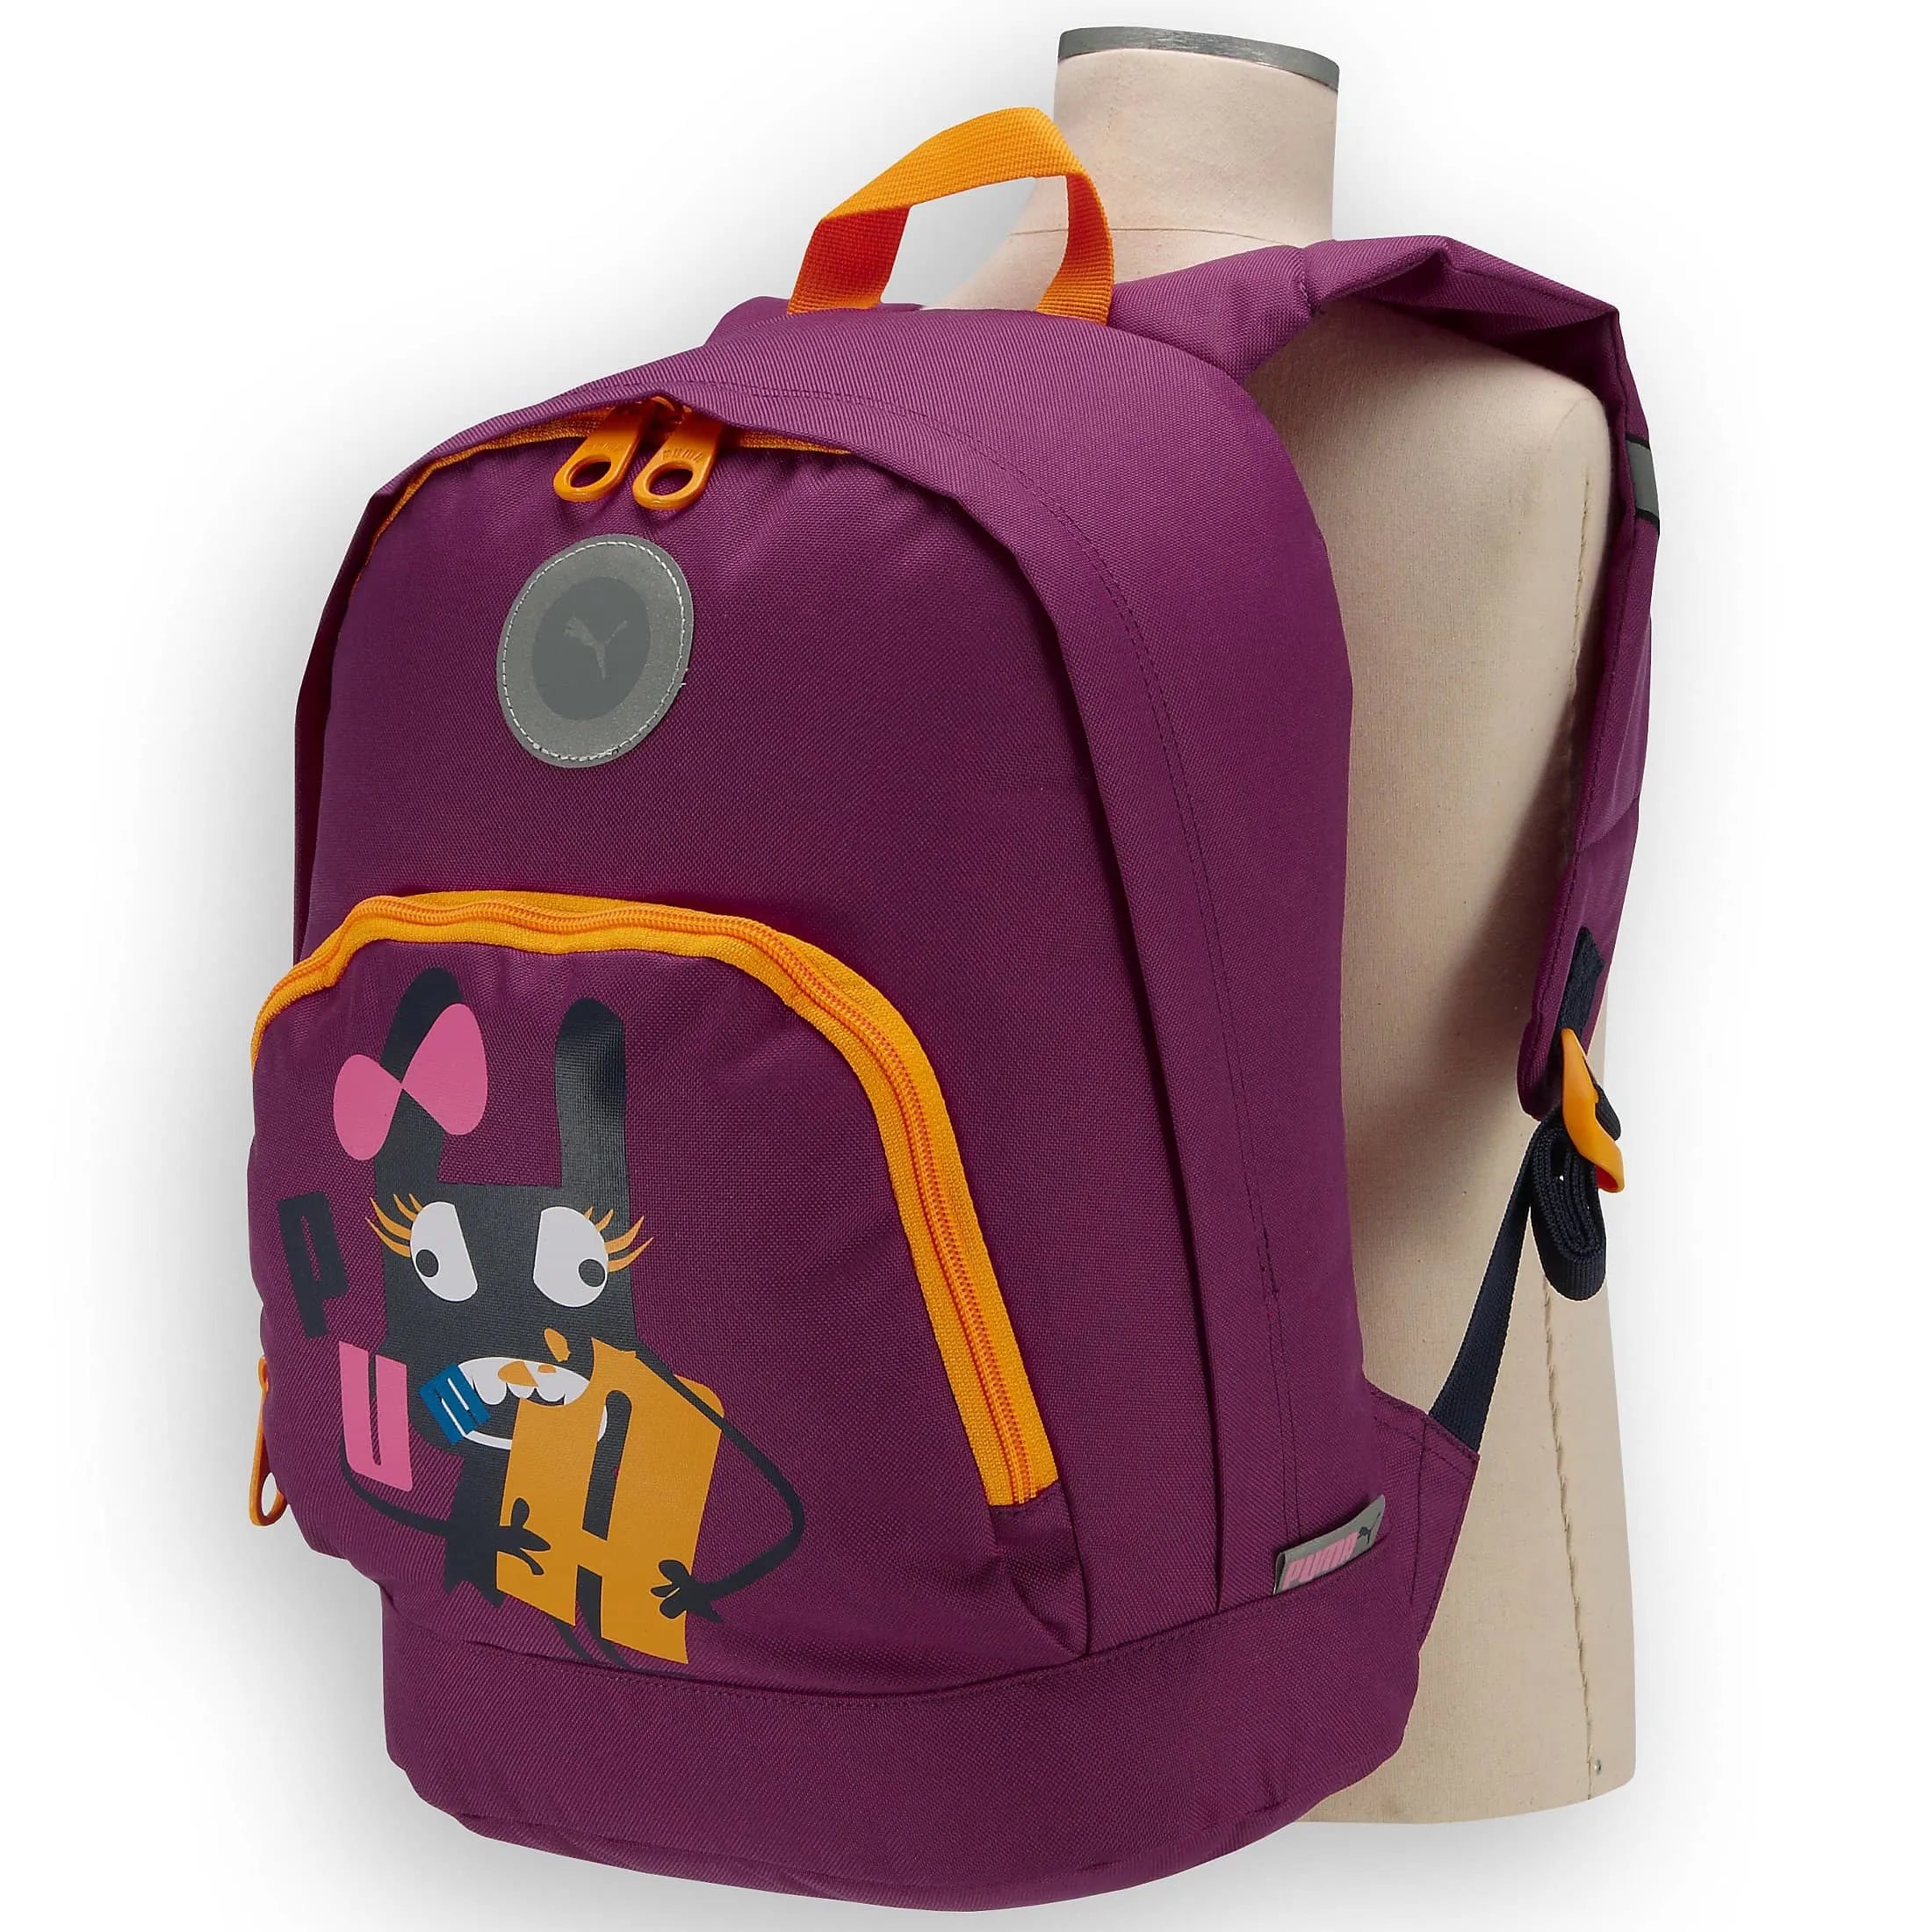 Puma Primary Backpack Backpack 37 cm - calypso coral-bird graphic